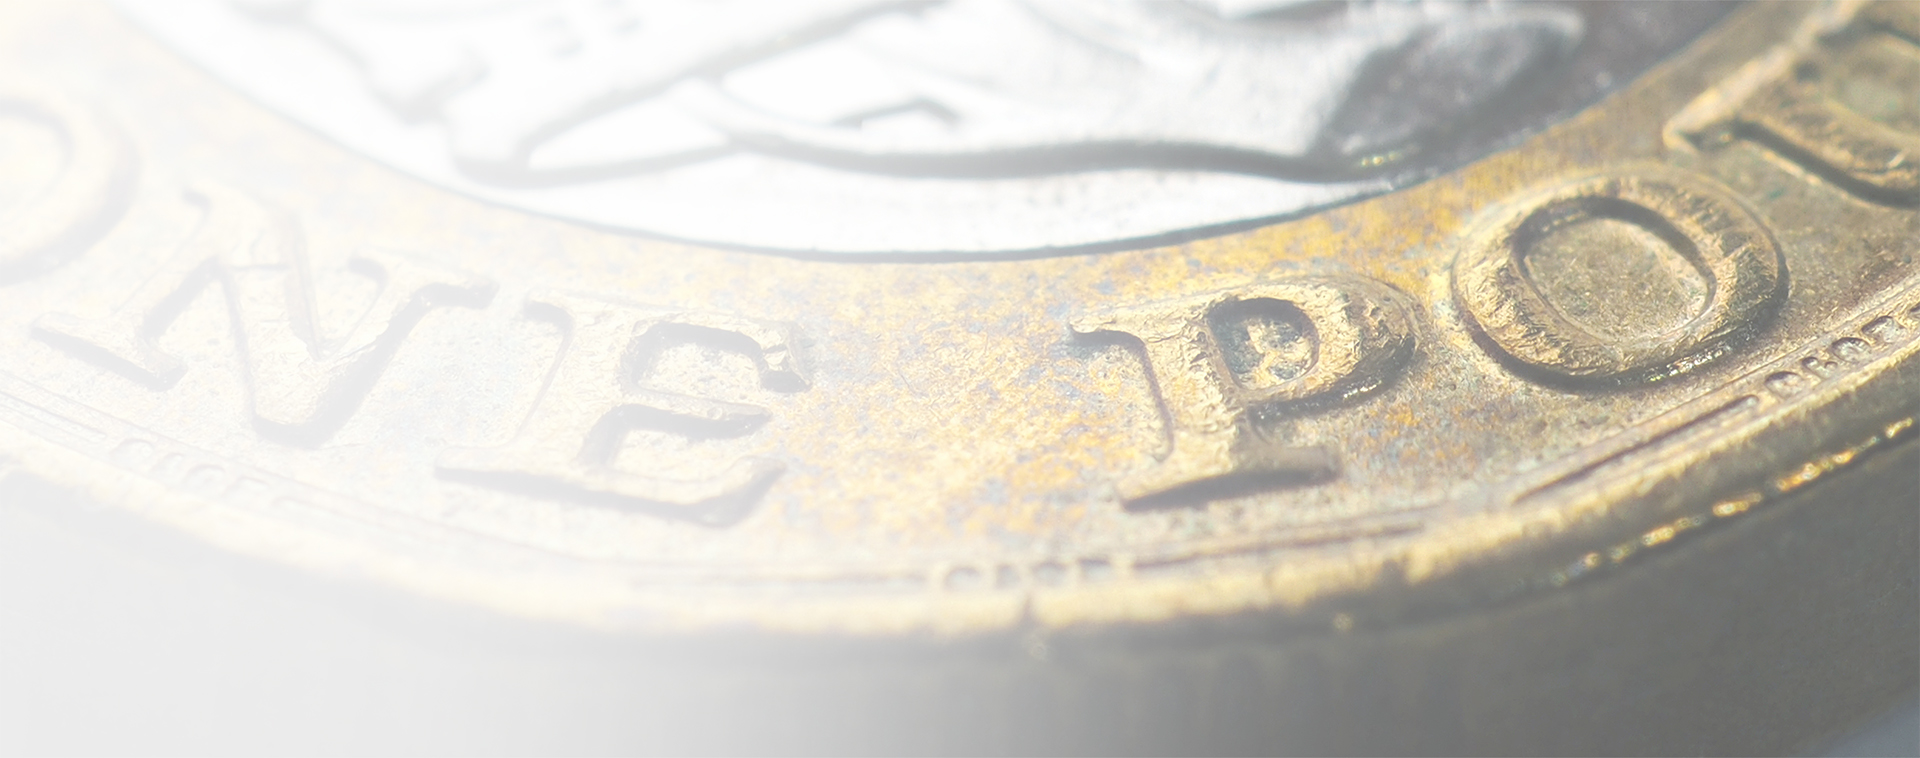 Image showing a close up of a pound coin